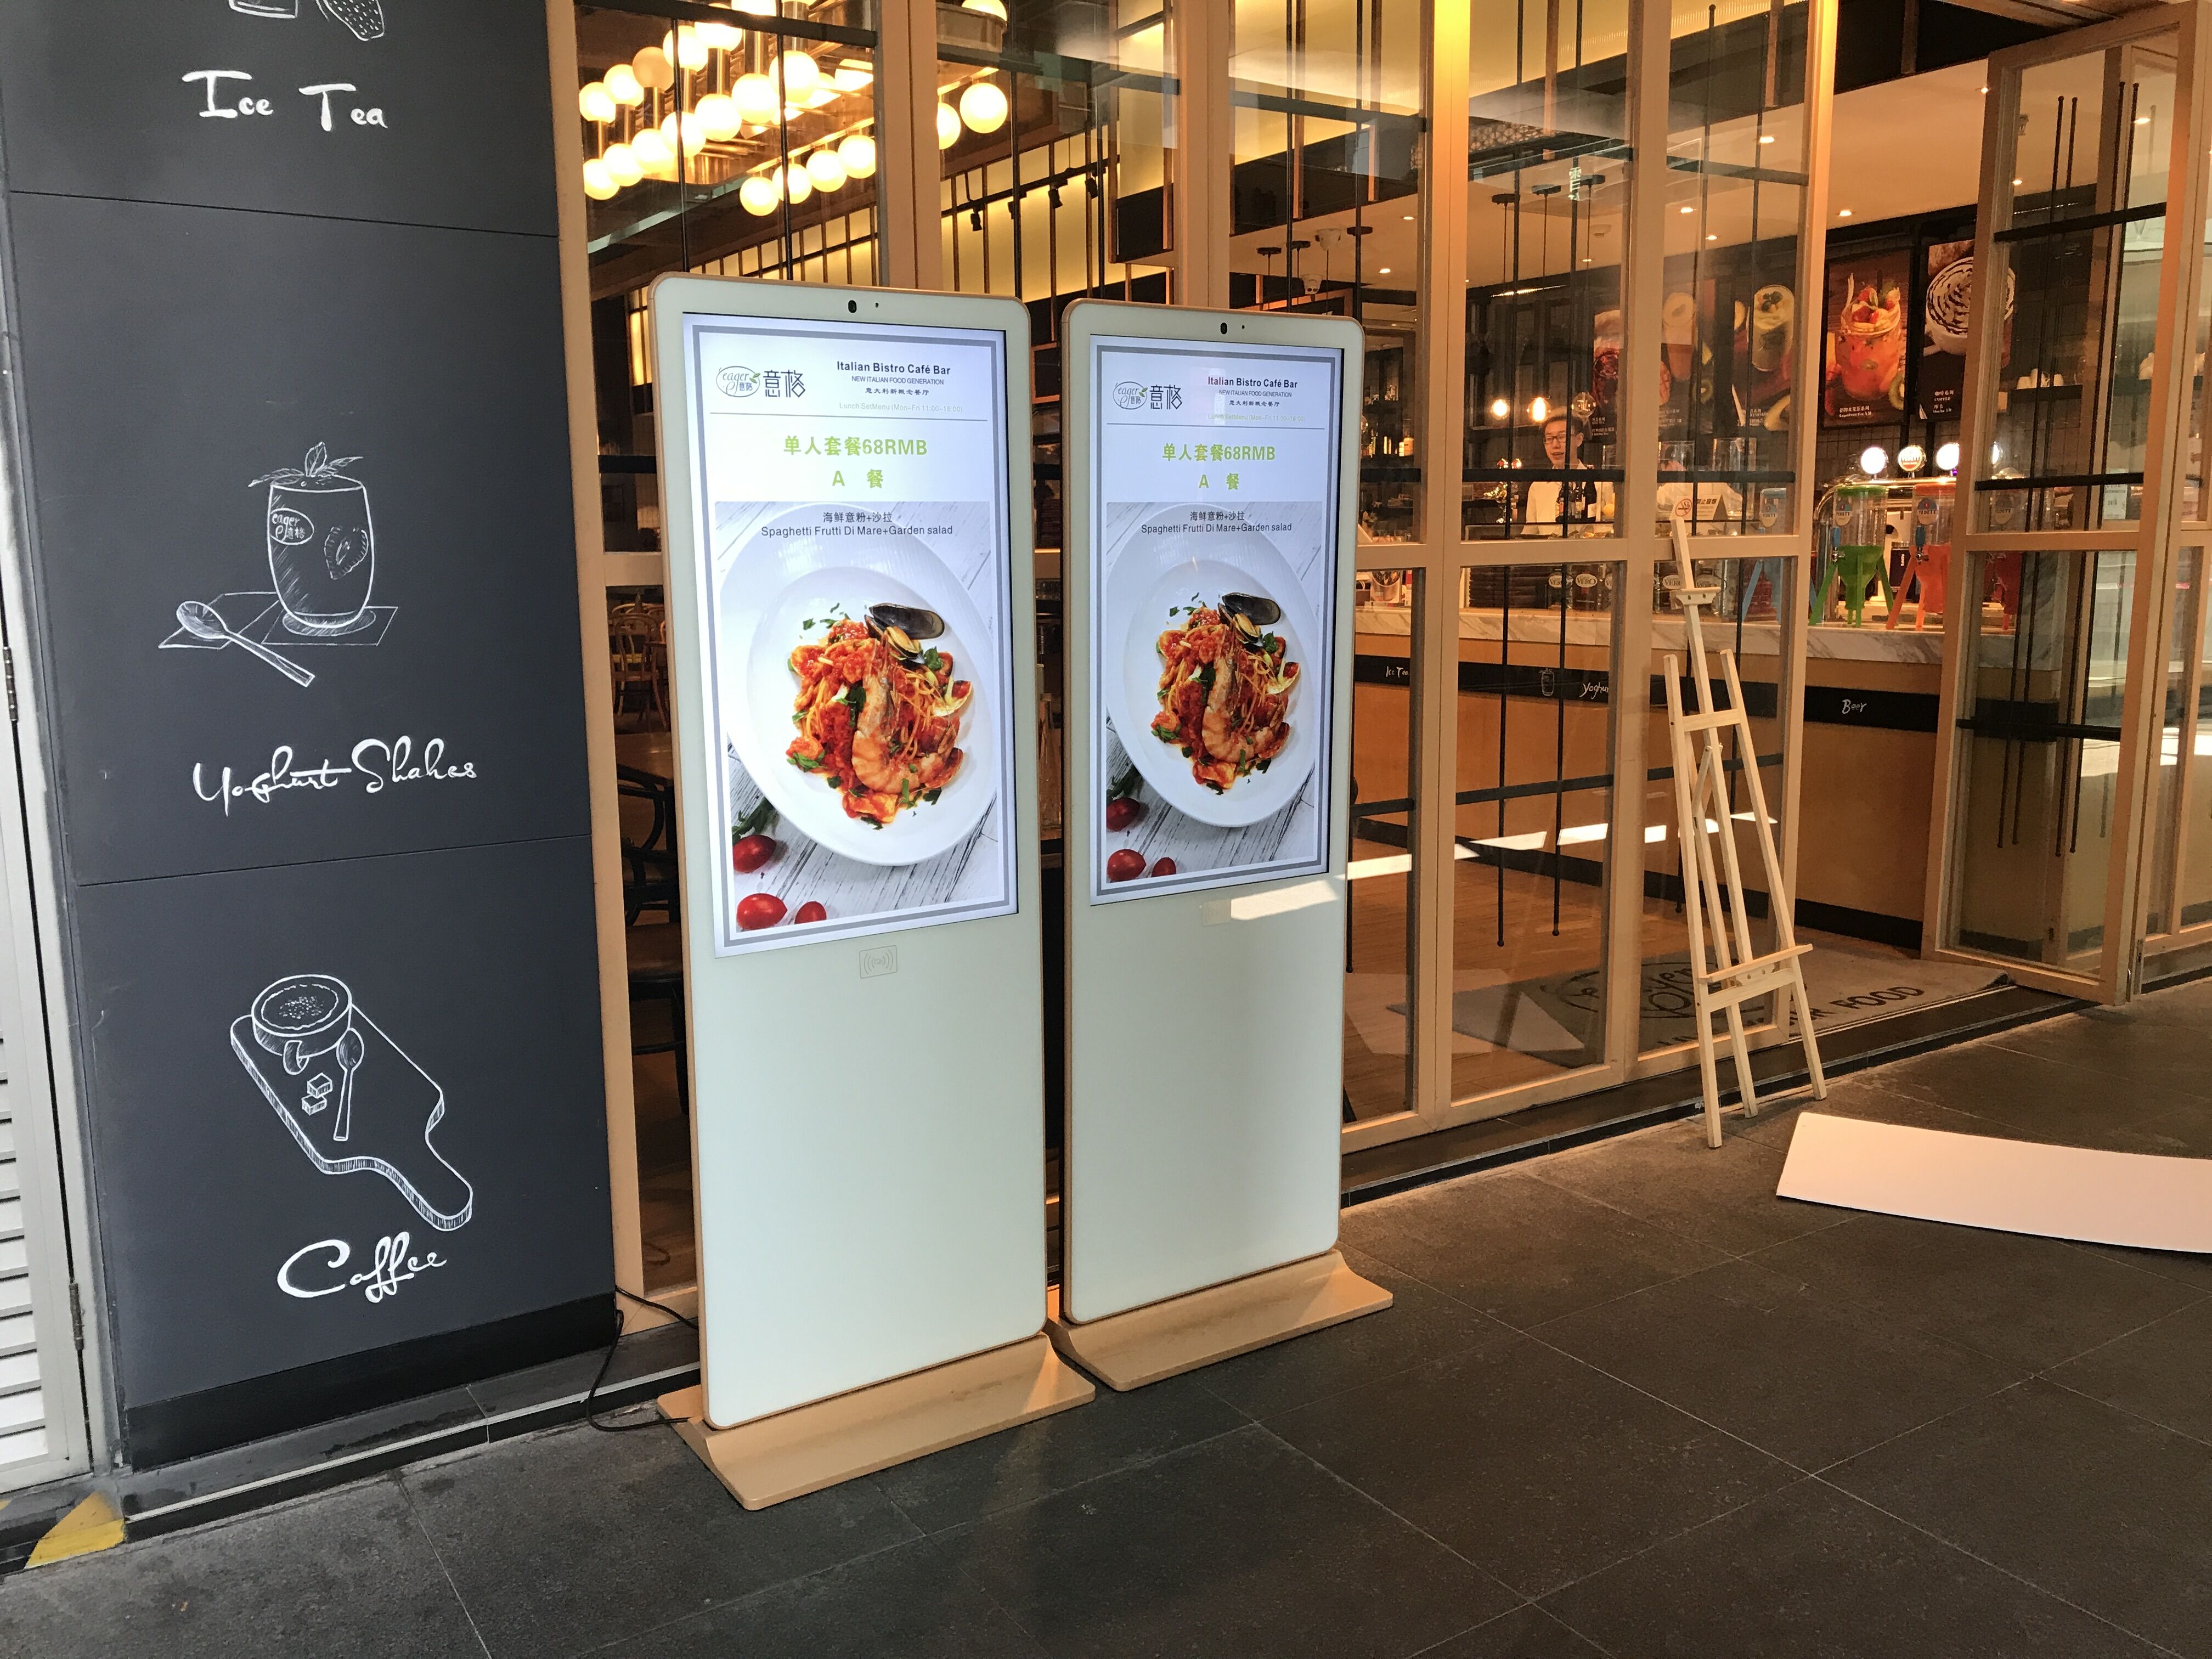 42 inch hd touch screen digital signage in restaurant